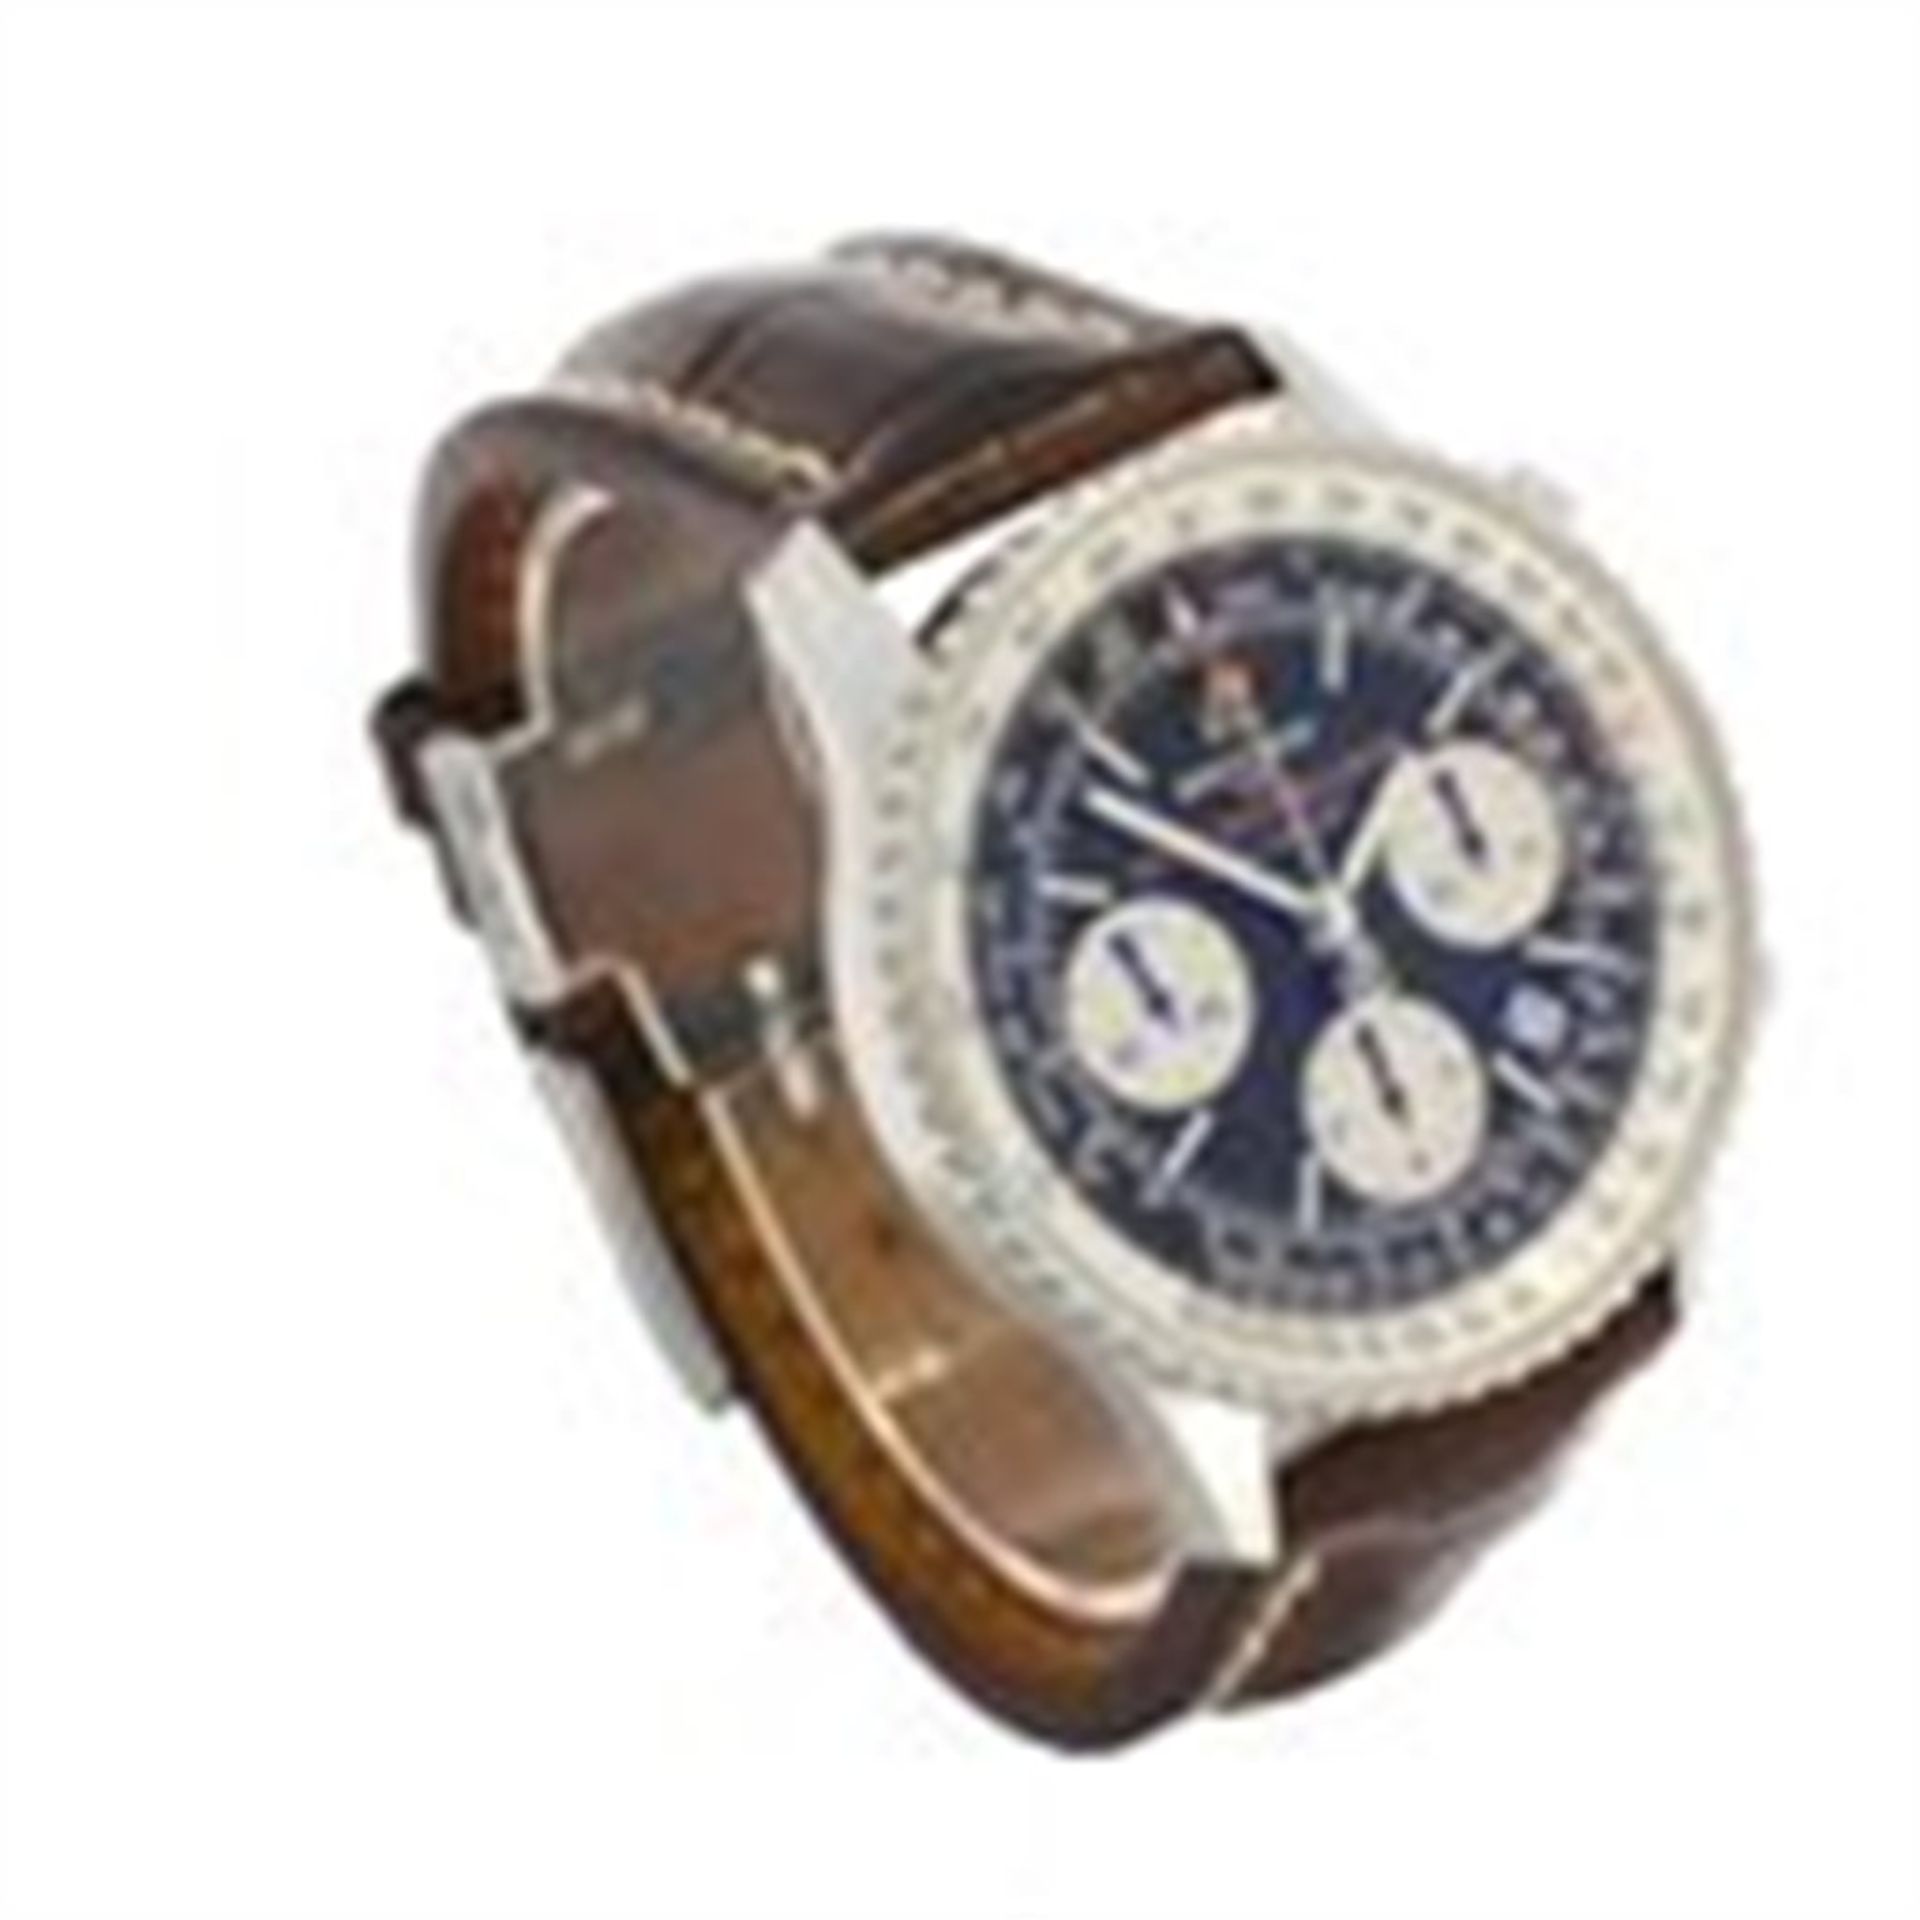 Brietling Navitimer Super Constellation Limited Edition Automatic Stainless Steel Gentleman's Watch - Image 8 of 10